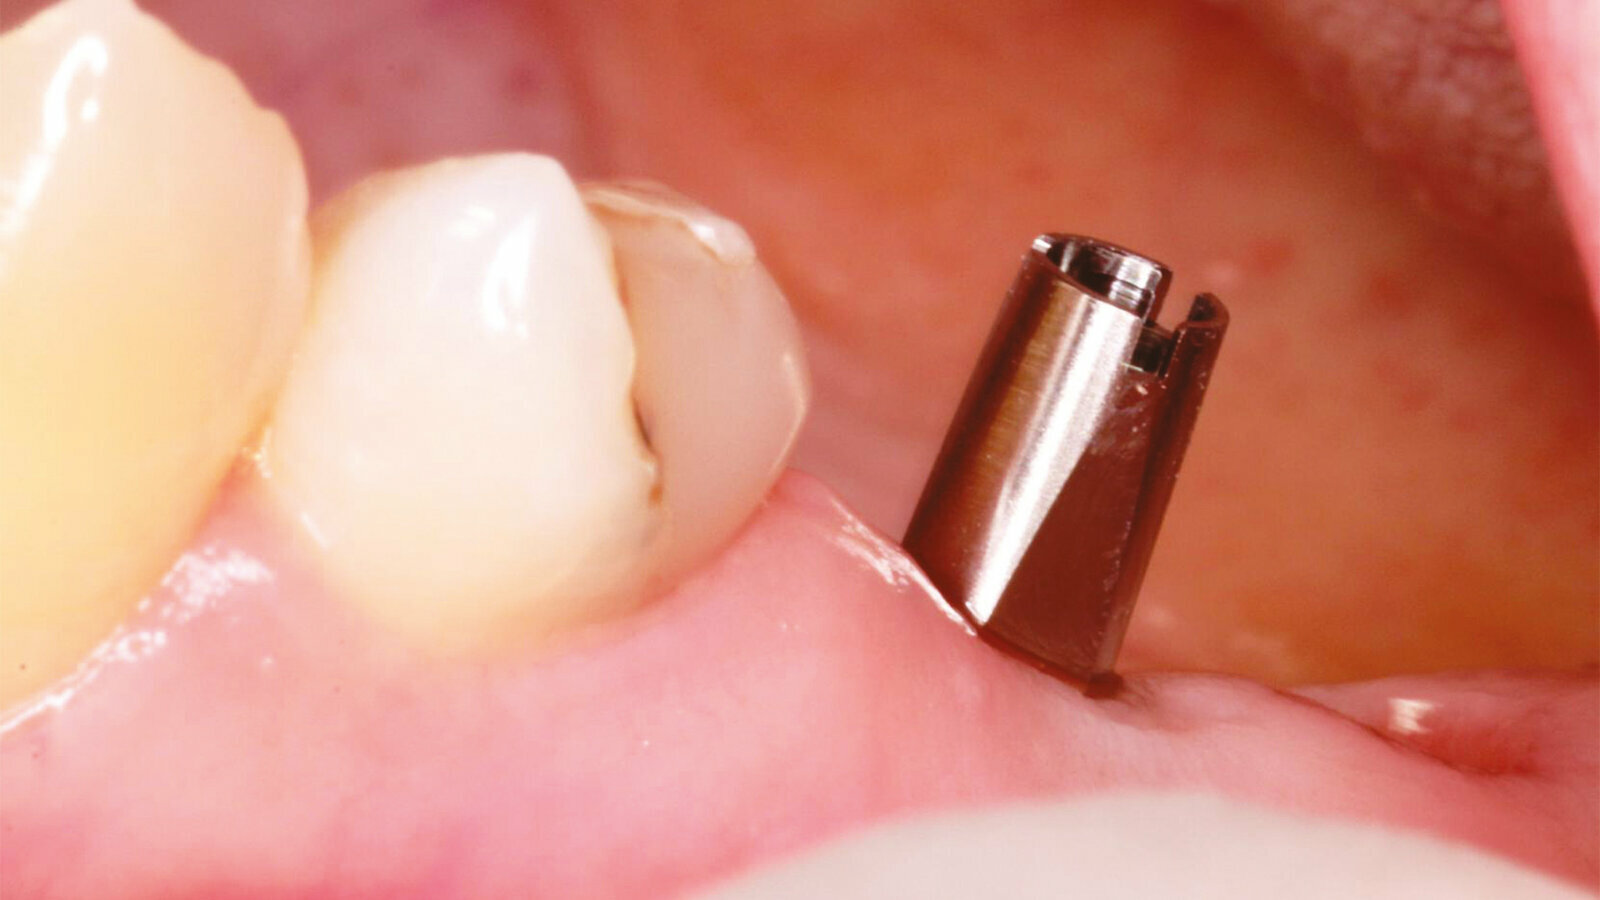 Achieving a higher standard in implant therapy for your patients
